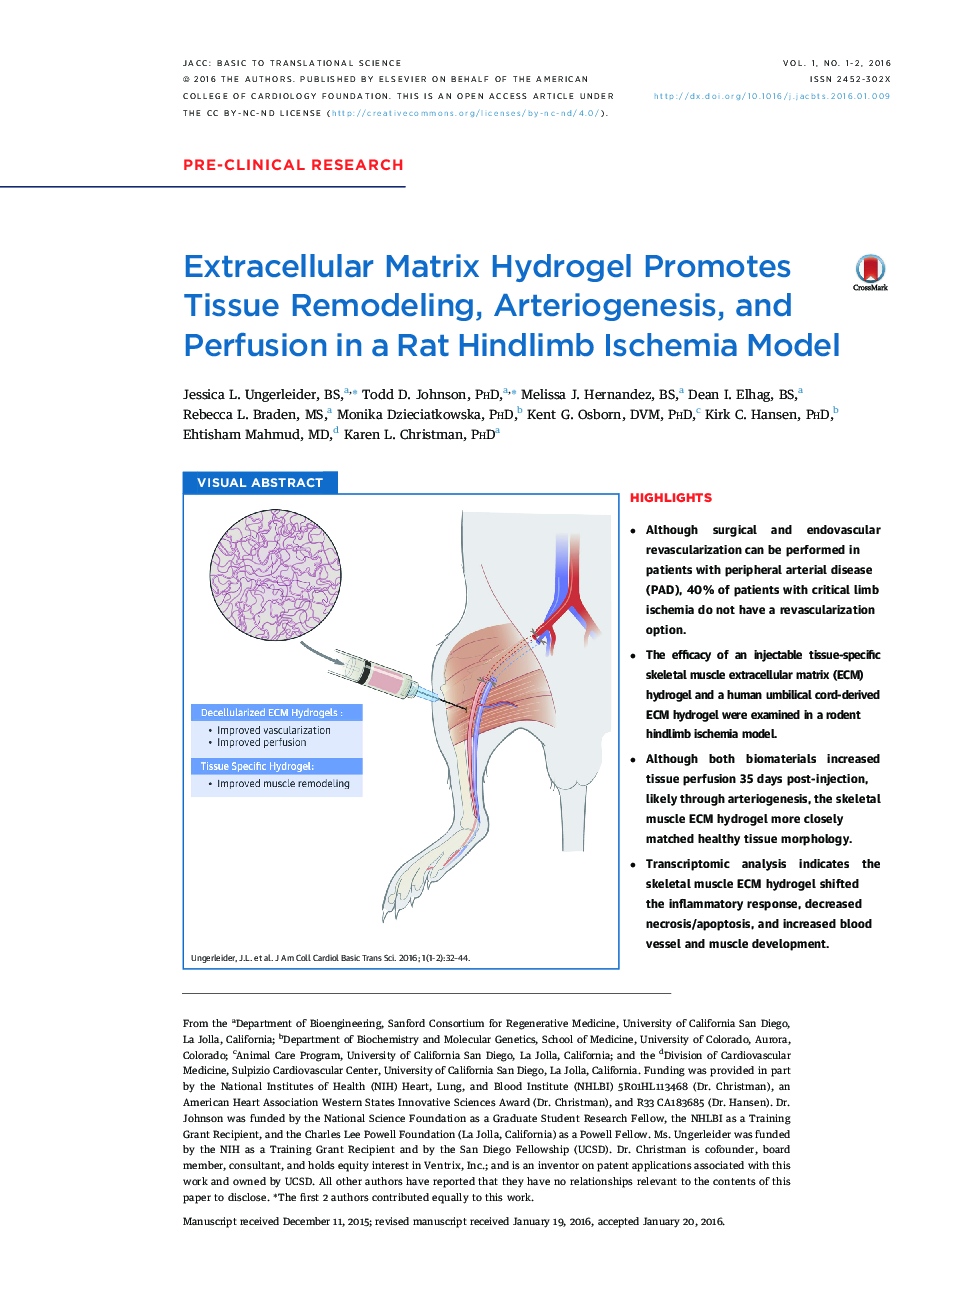 Extracellular Matrix Hydrogel Promotes Tissue Remodeling, Arteriogenesis, and Perfusion in a Rat Hindlimb Ischemia Model 